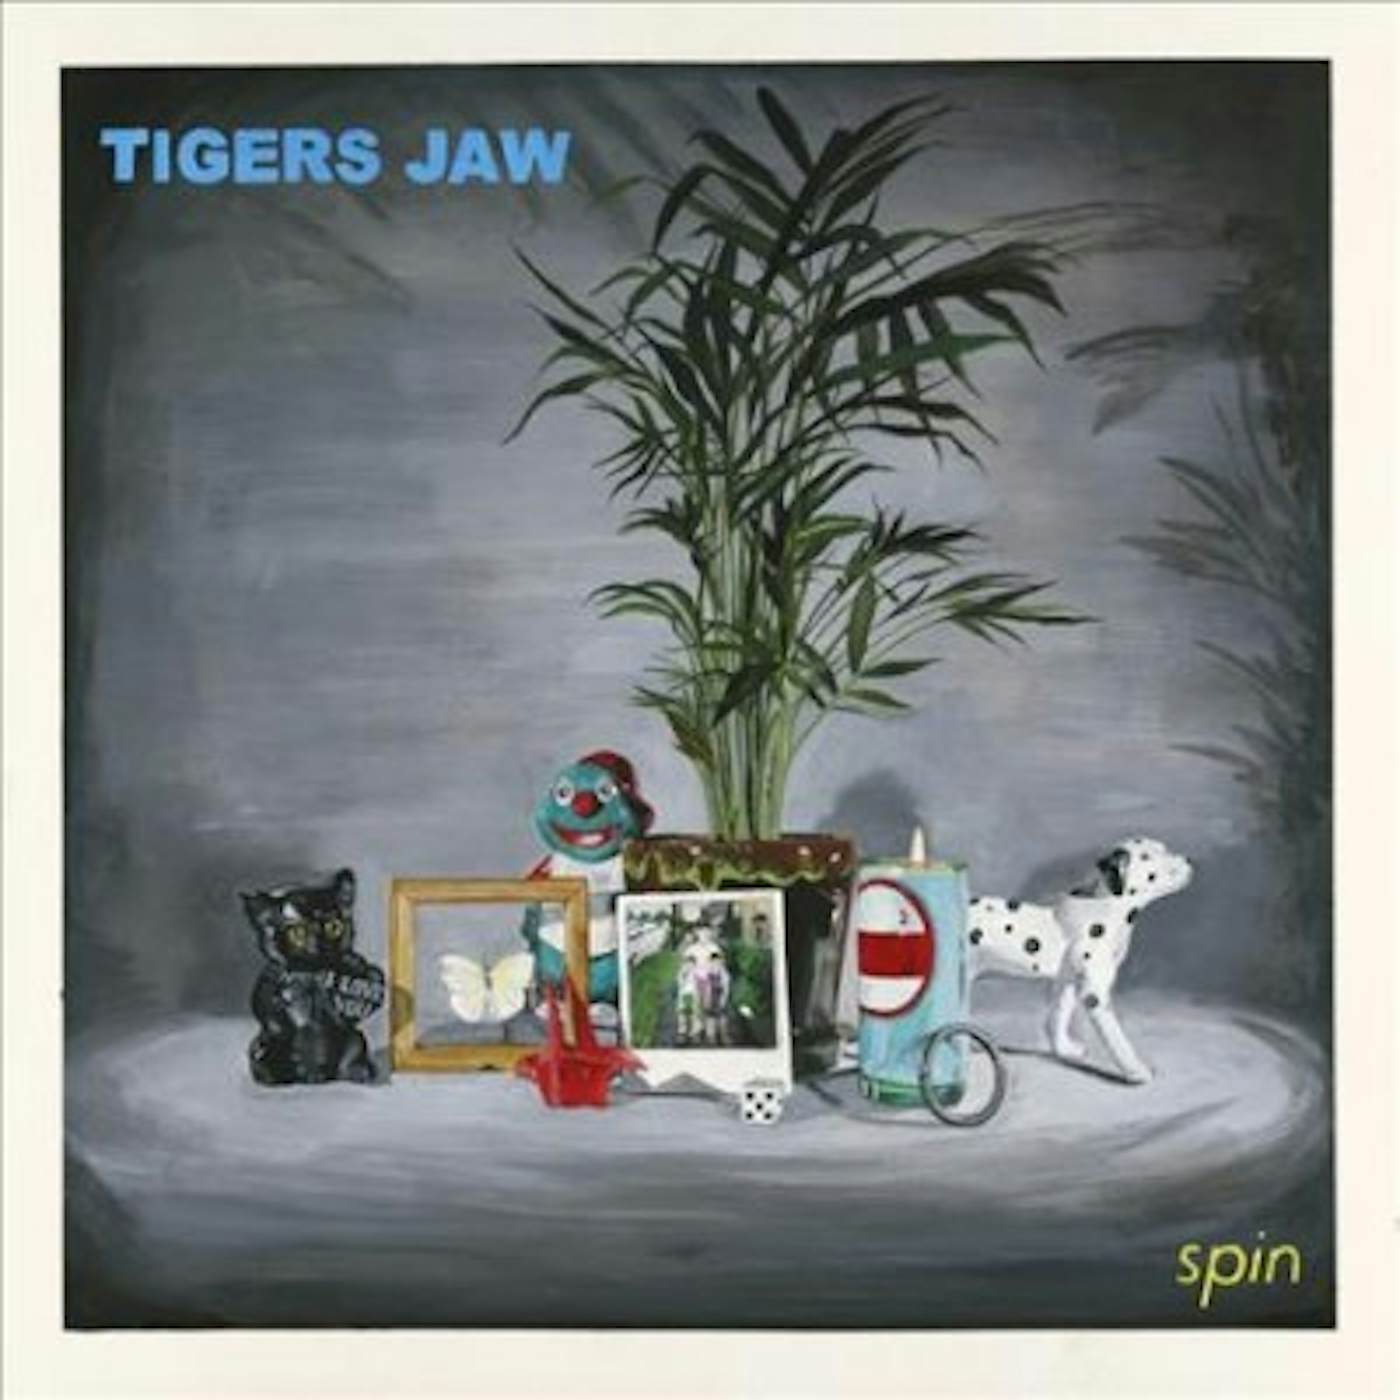 Tigers Jaw Spin Vinyl Record